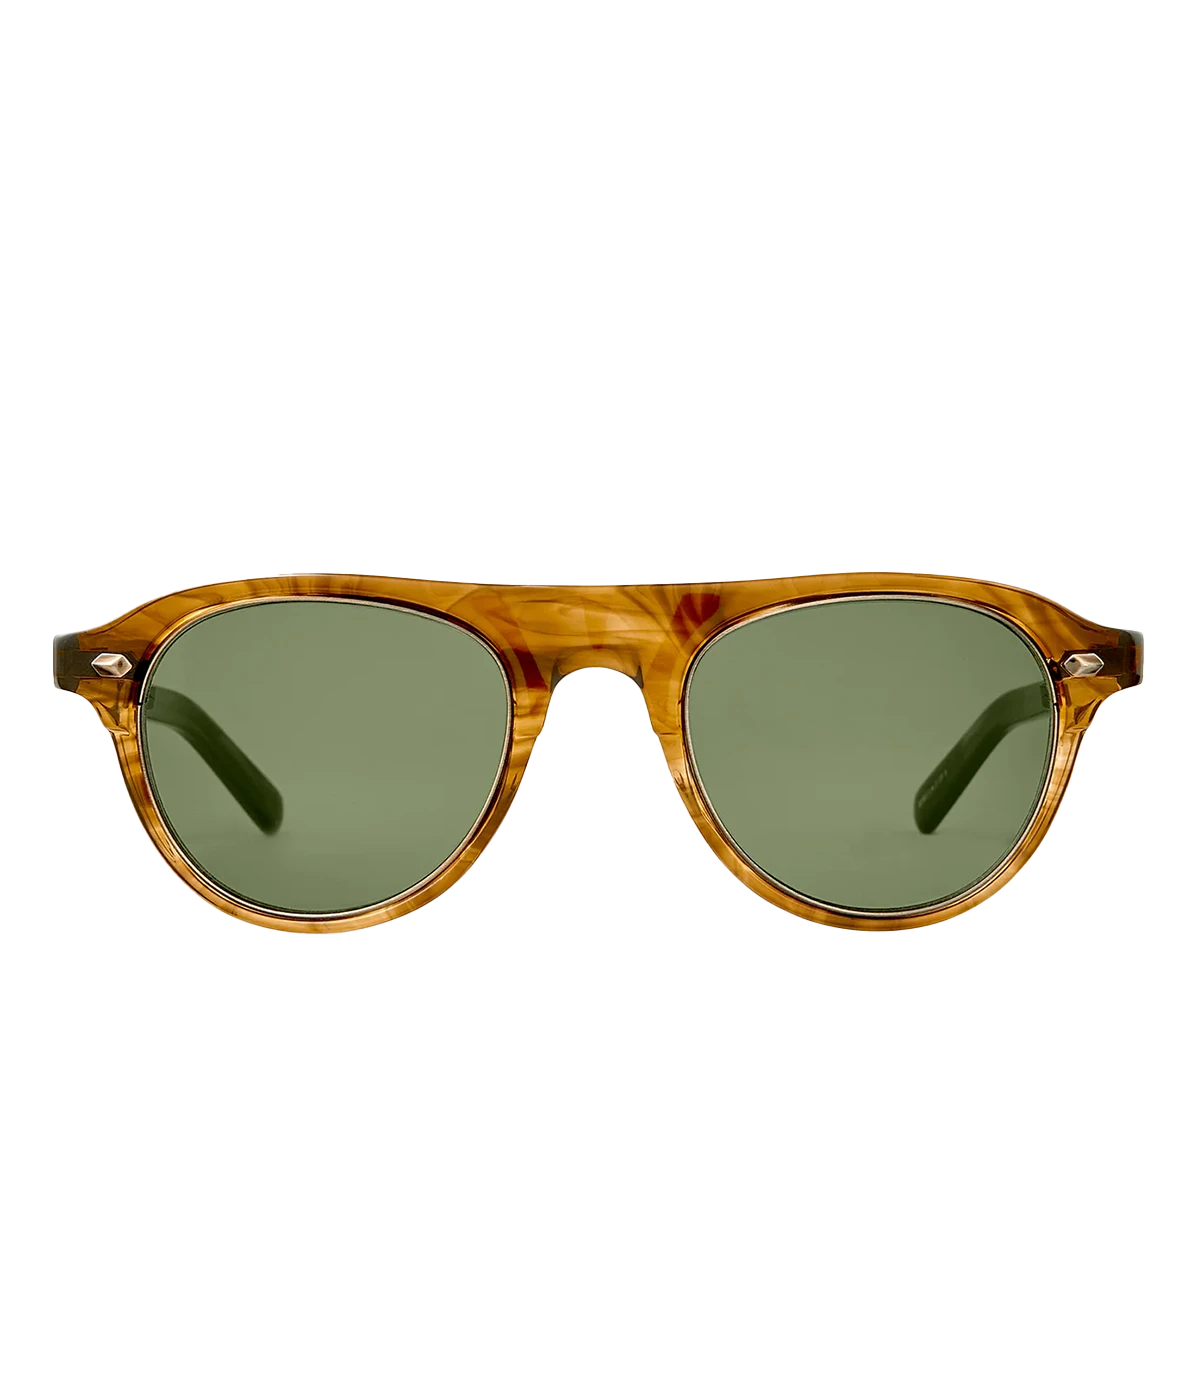 Round aviator style sunglasses by Mr Leight, Handcrafted in Japan with green lenses.